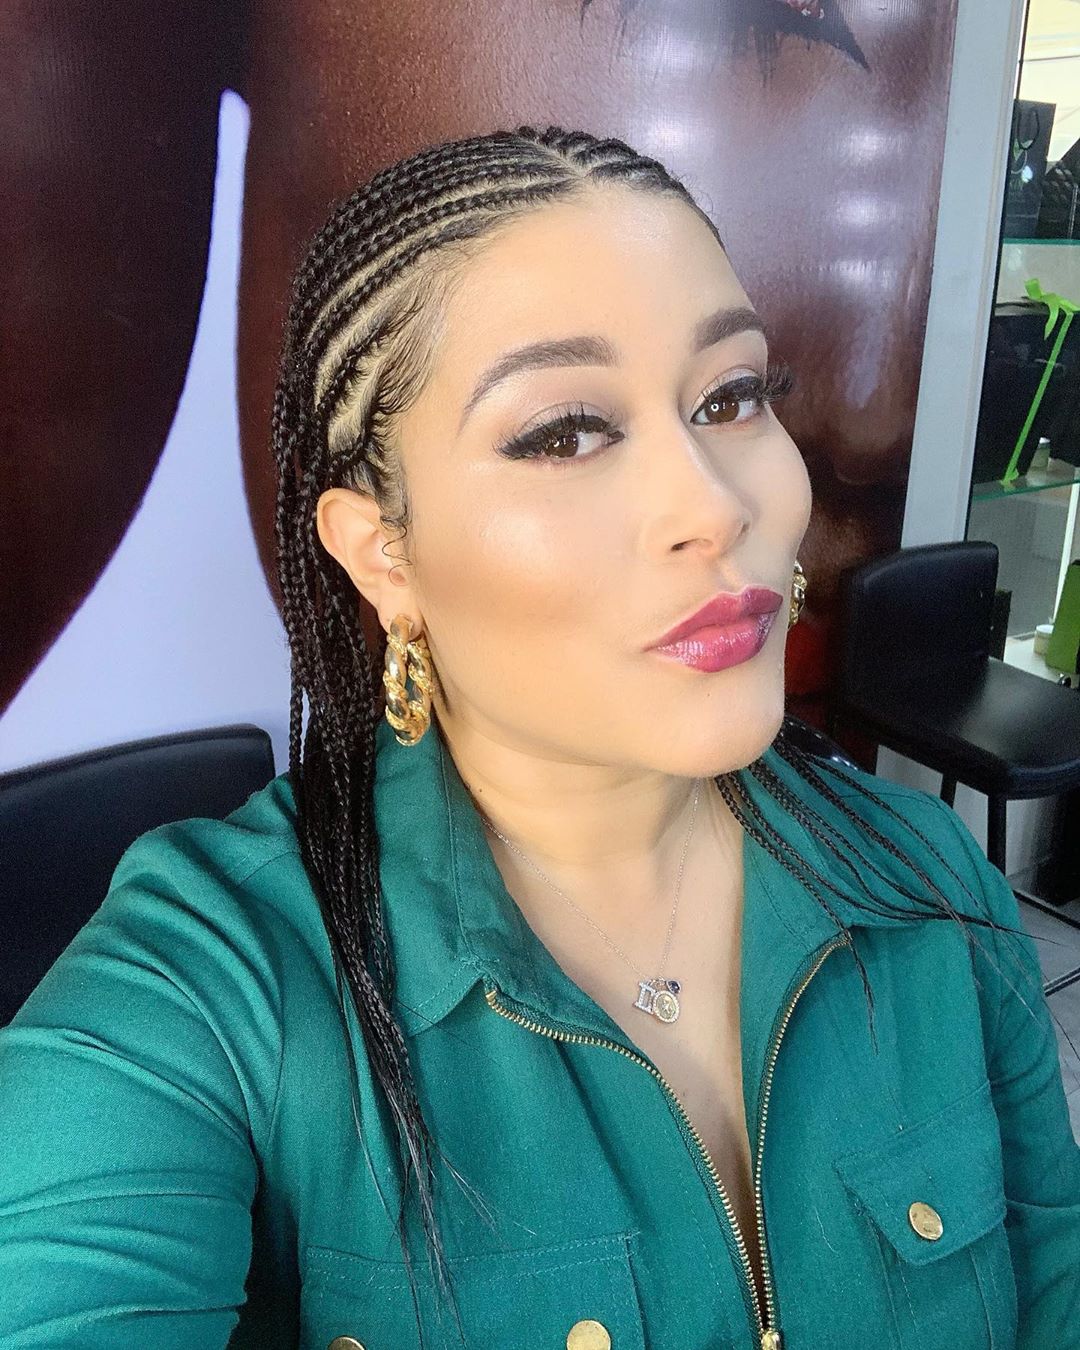 Adunni Ade schools troll who called her a 'rude bitch'